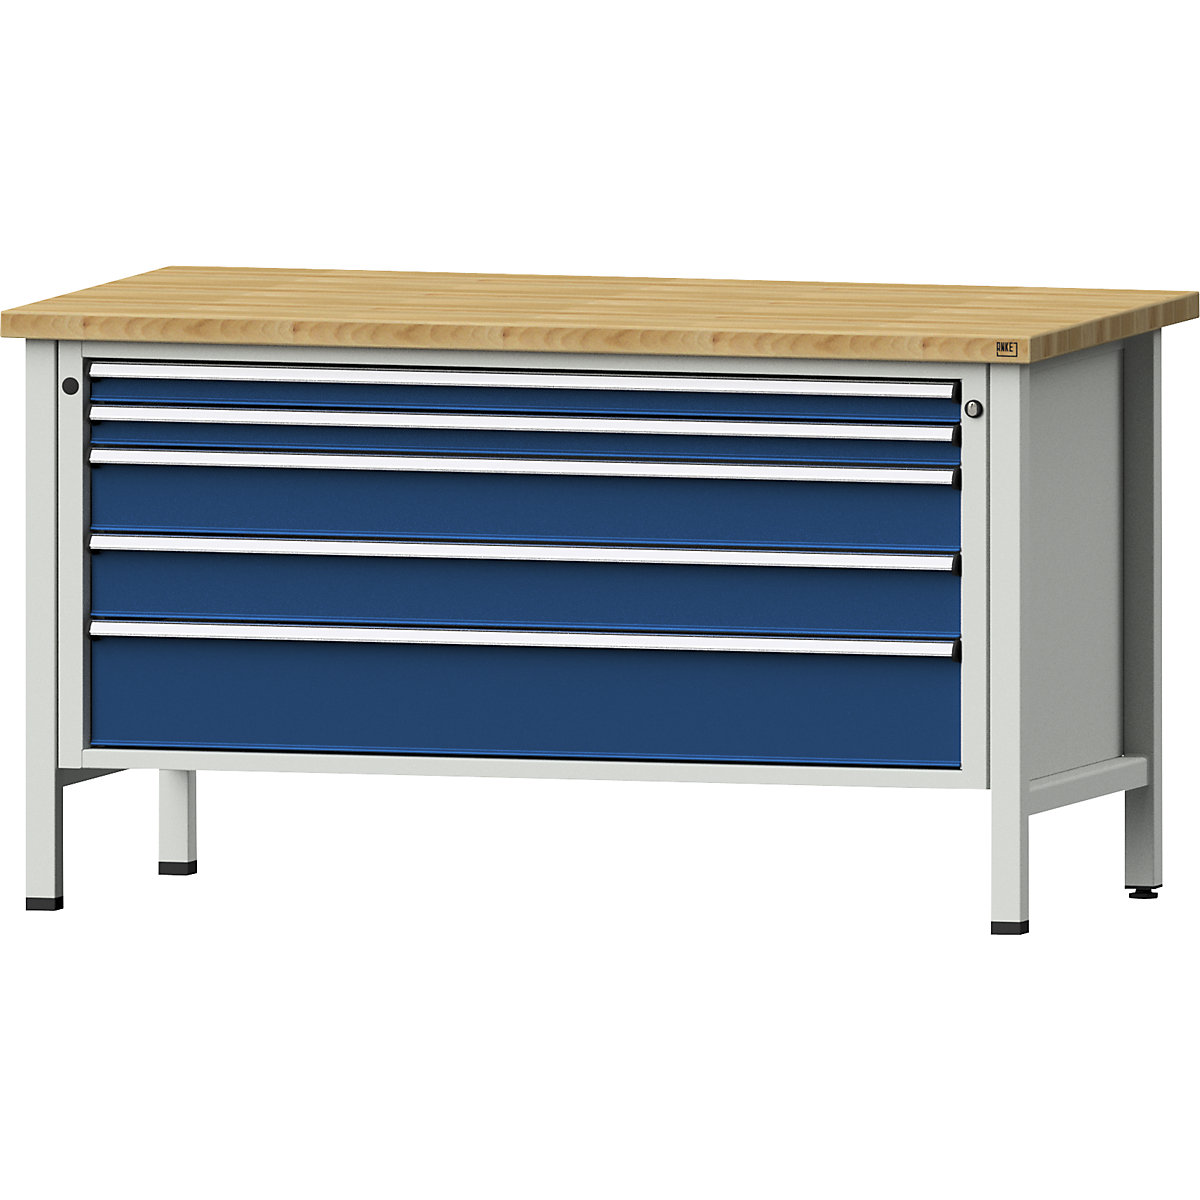 Workbench with XL/XXL drawers, frame construction – ANKE, width 1500 mm, 5 drawers, solid beech worktop, front in gentian blue-13